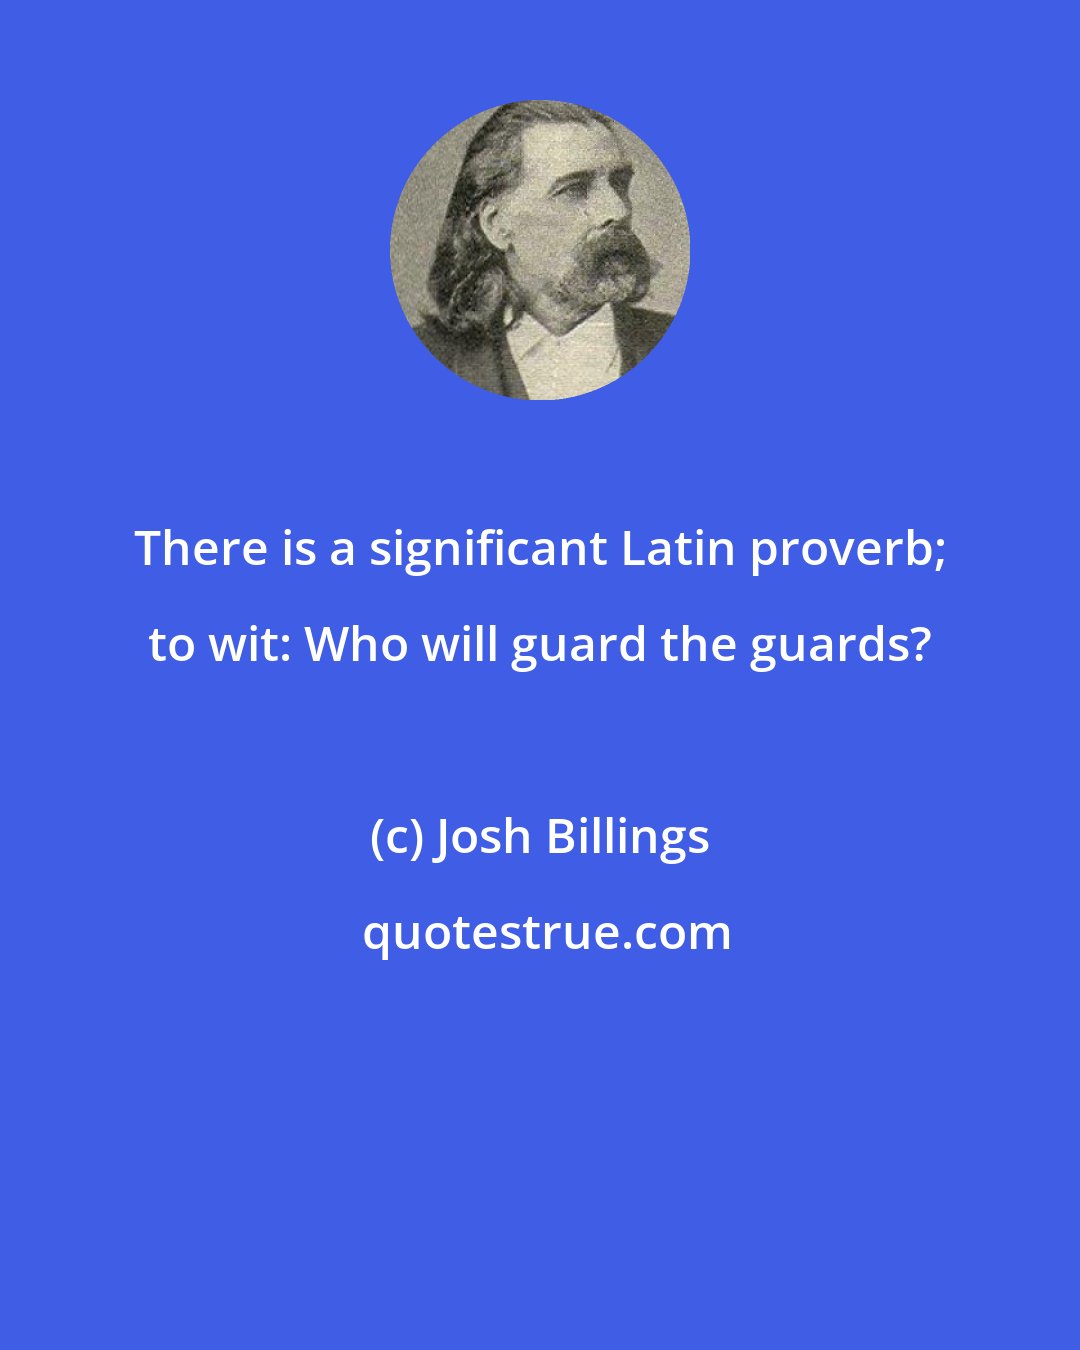 Josh Billings: There is a significant Latin proverb; to wit: Who will guard the guards?